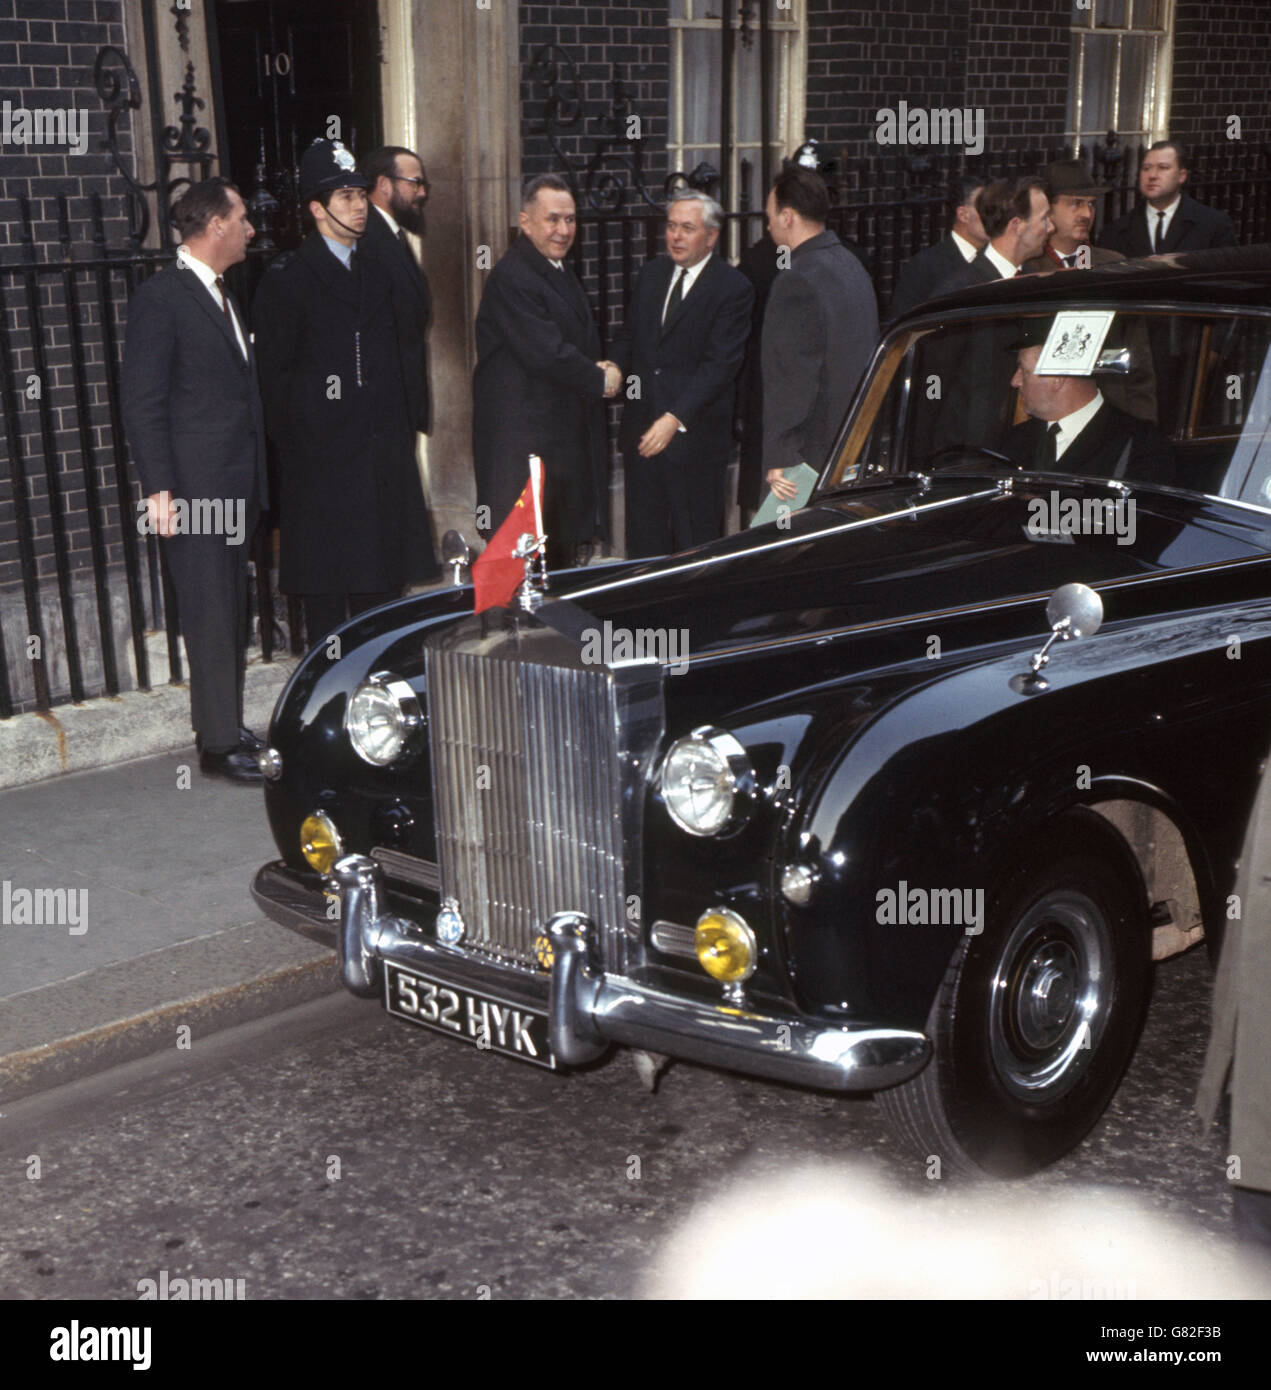 Prime Minister Harold Wilson shares hands with Soviet Prime Minister Alexei Kosygin as he arrives at 10 Downing Street for a conference. Stock Photo